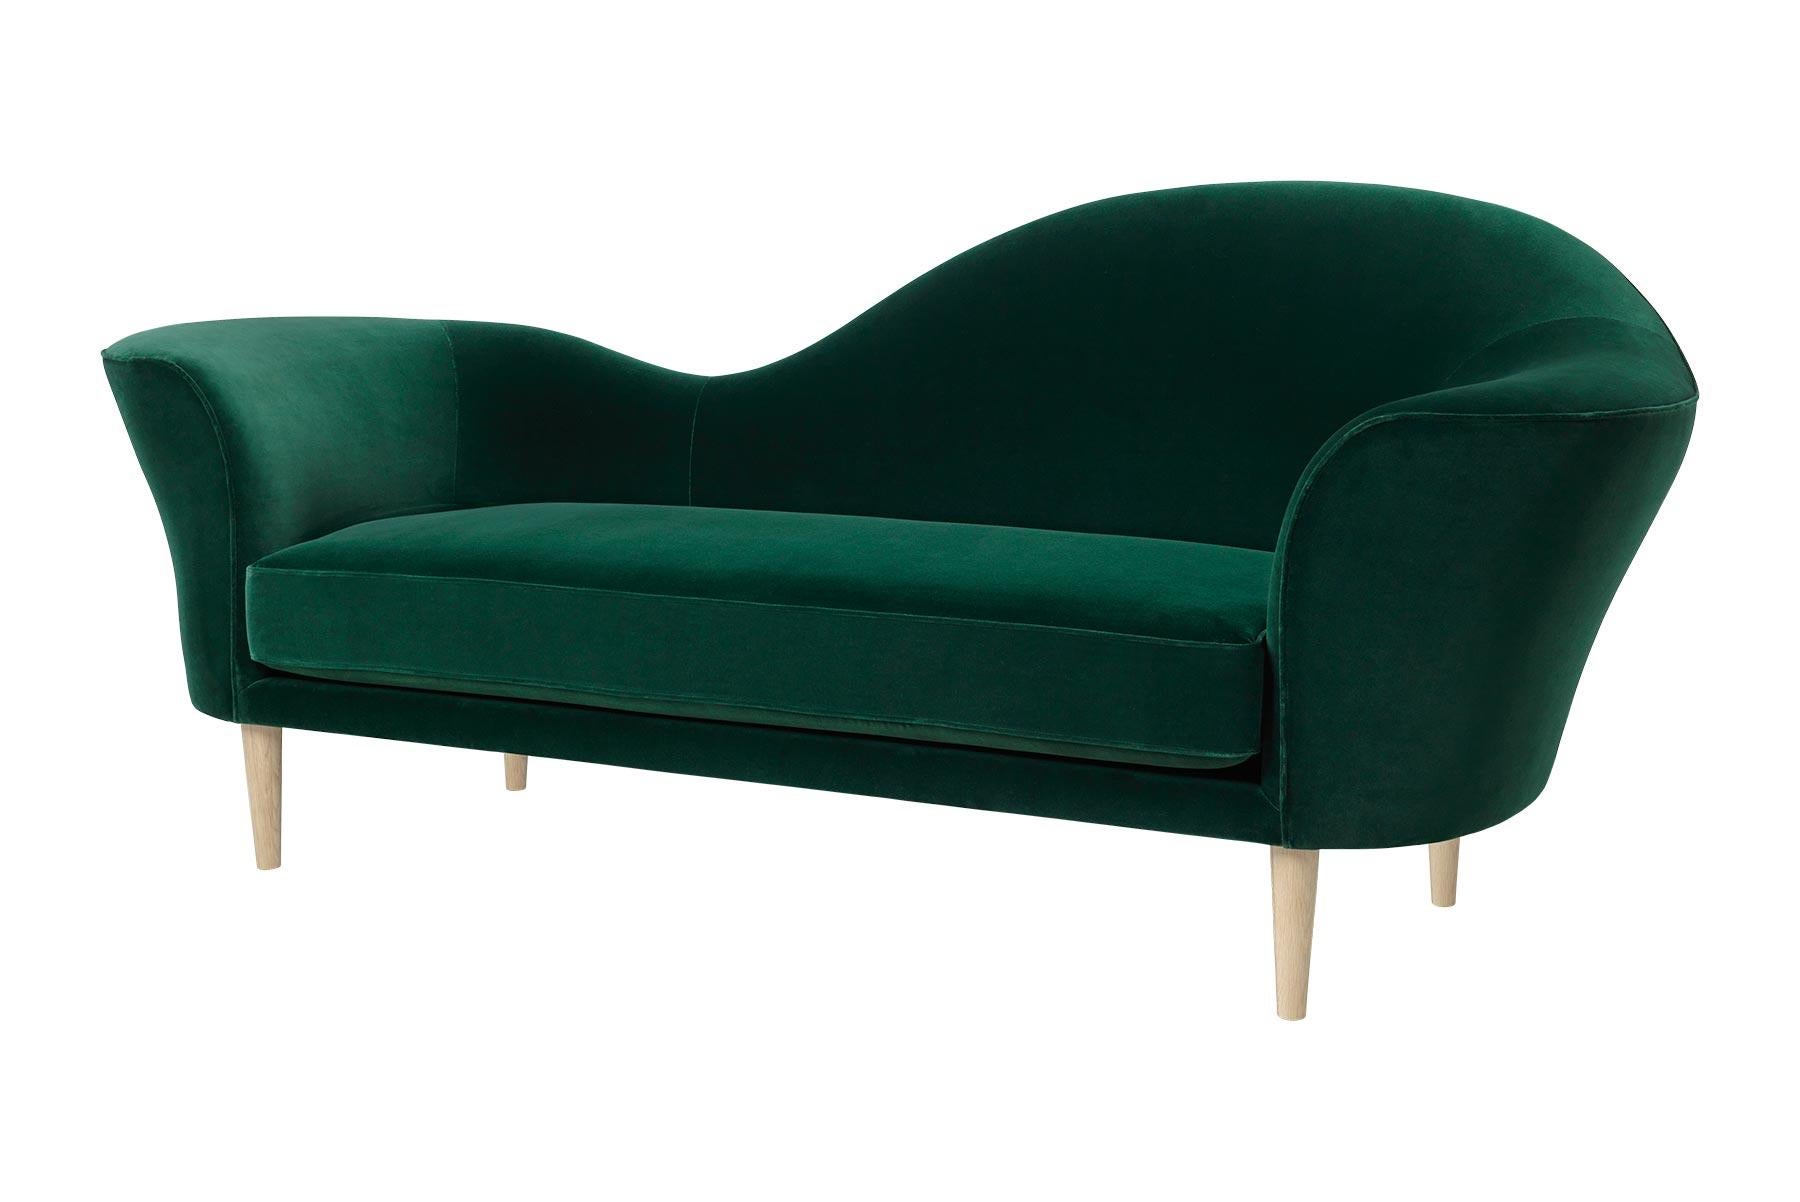 With its musical form and sculptural silhouette, the Grand Piano Sofa from 1984 takes both its name and inspiration from a grand piano. The unique design language reflects the designer Gubi Olsen’s true interest in classical music as well as soft,